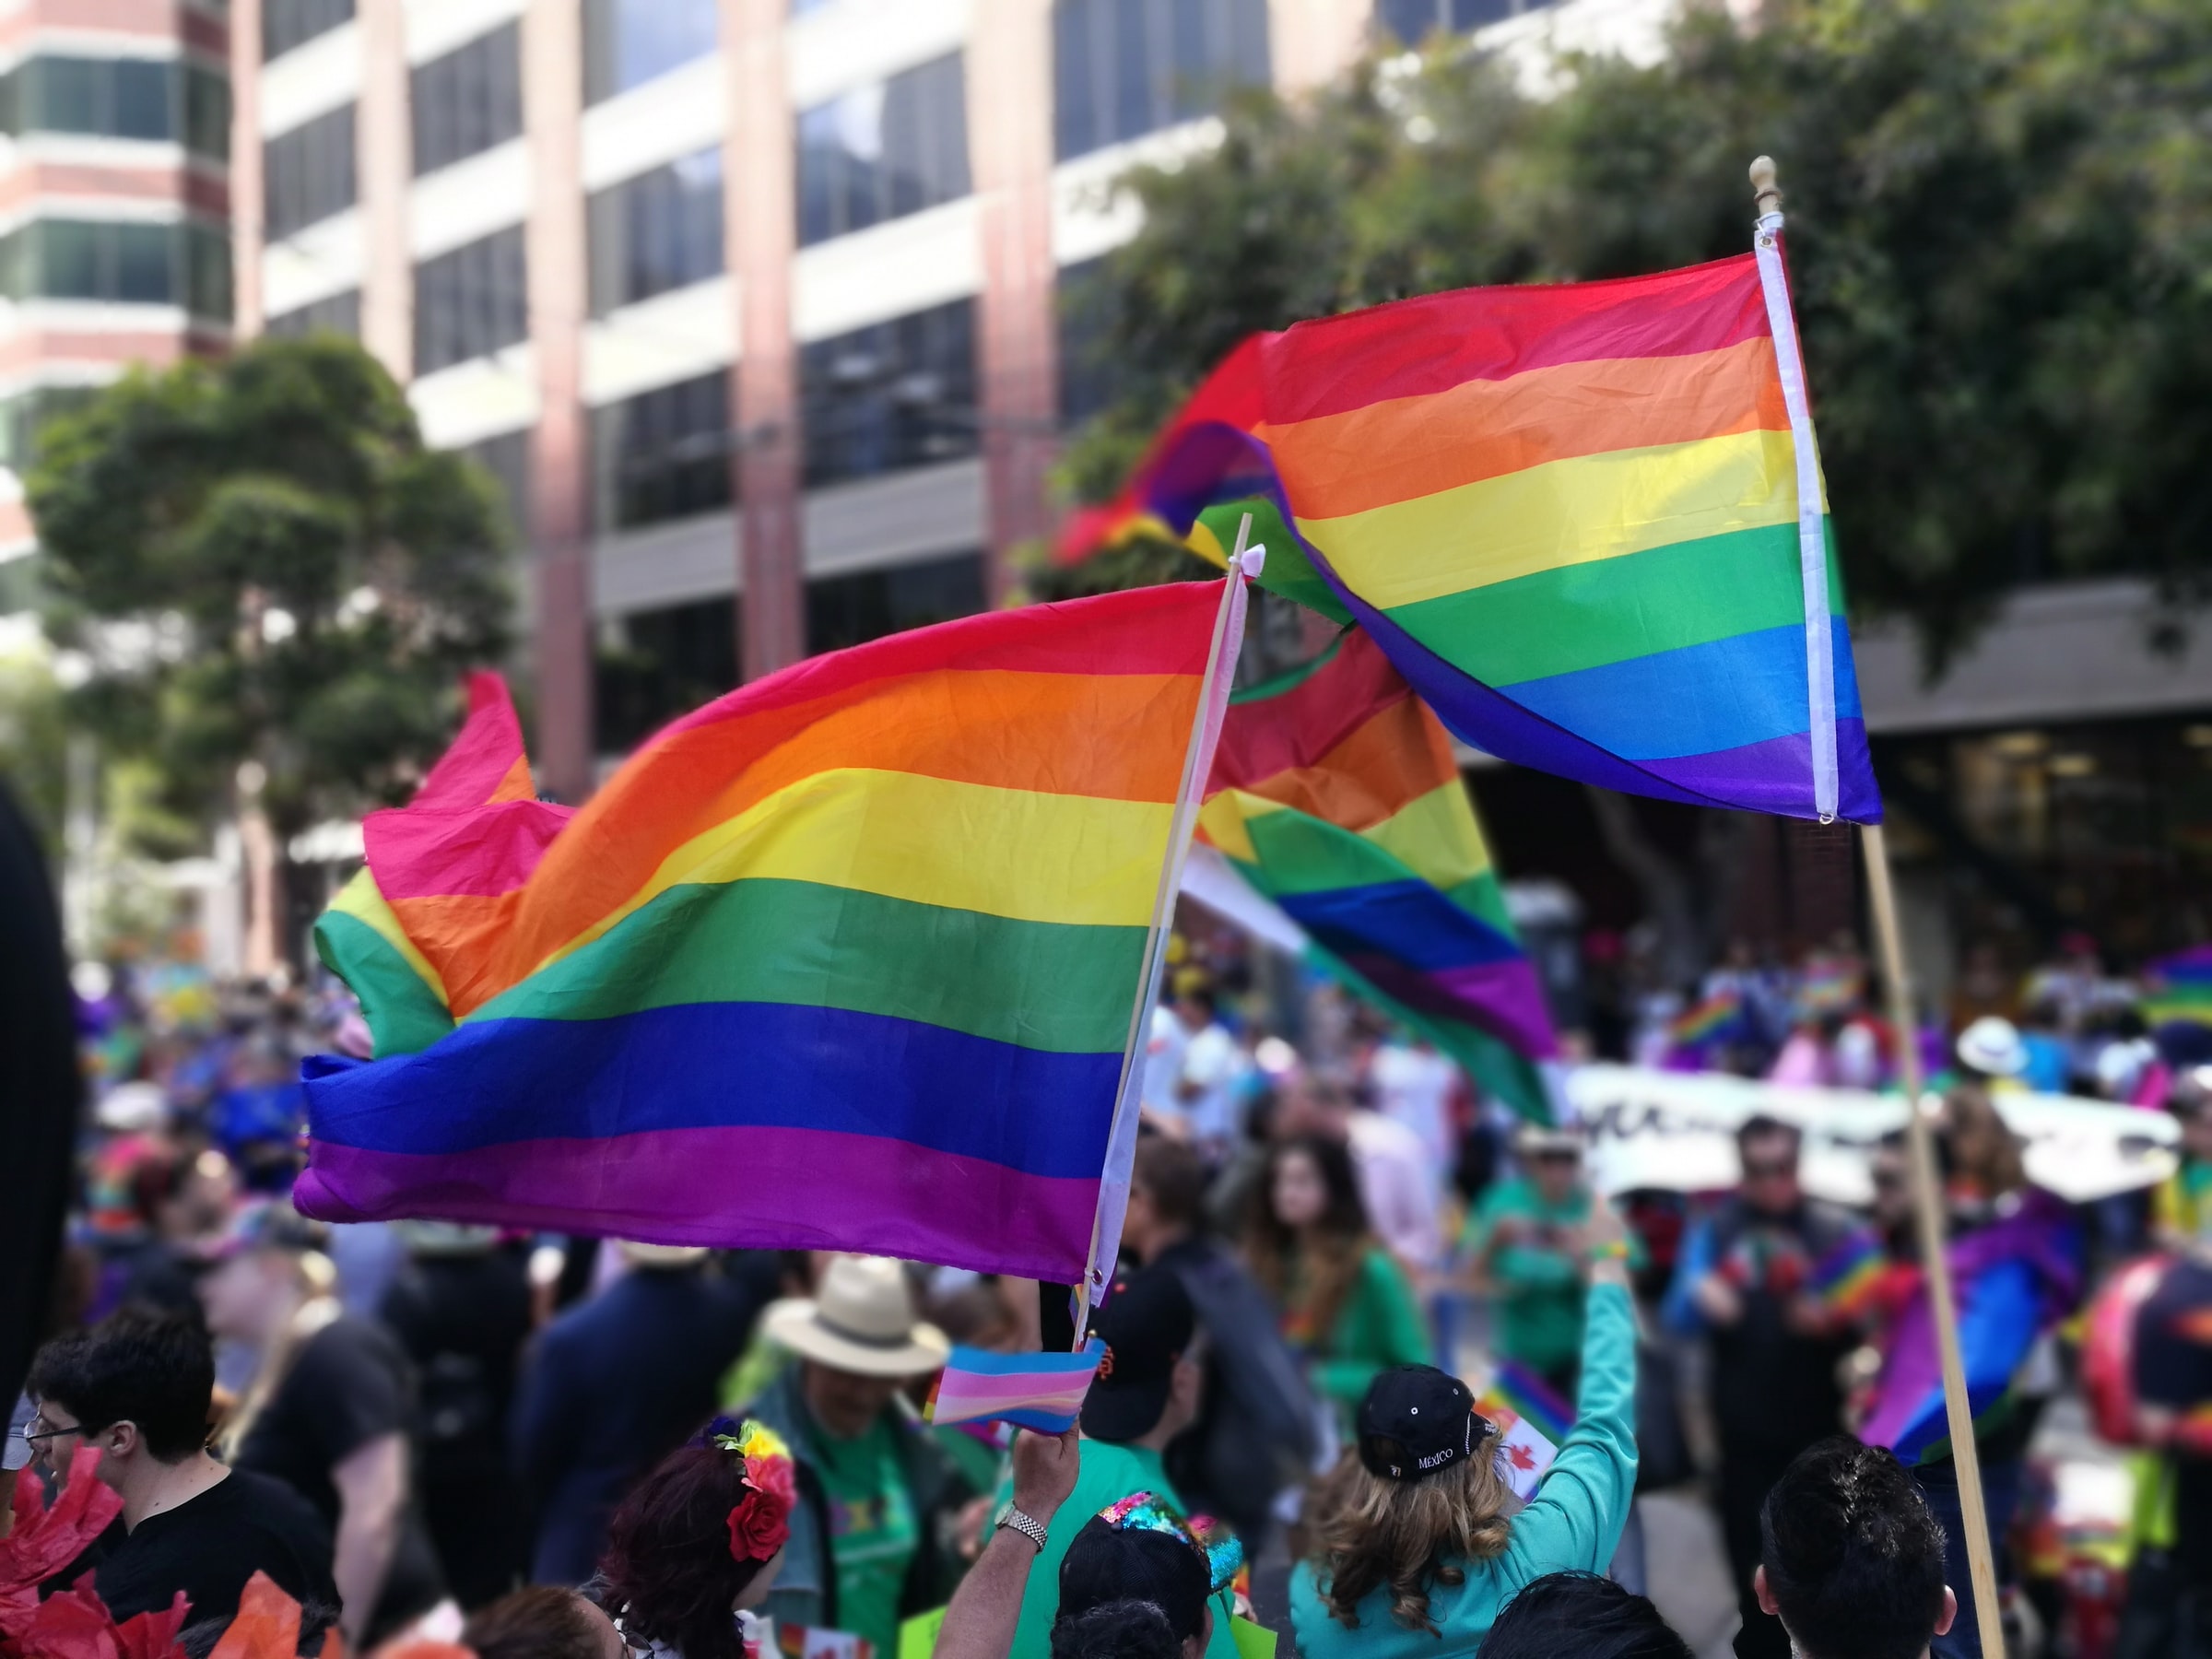 lgbtq flags being waved in a city's pride parade